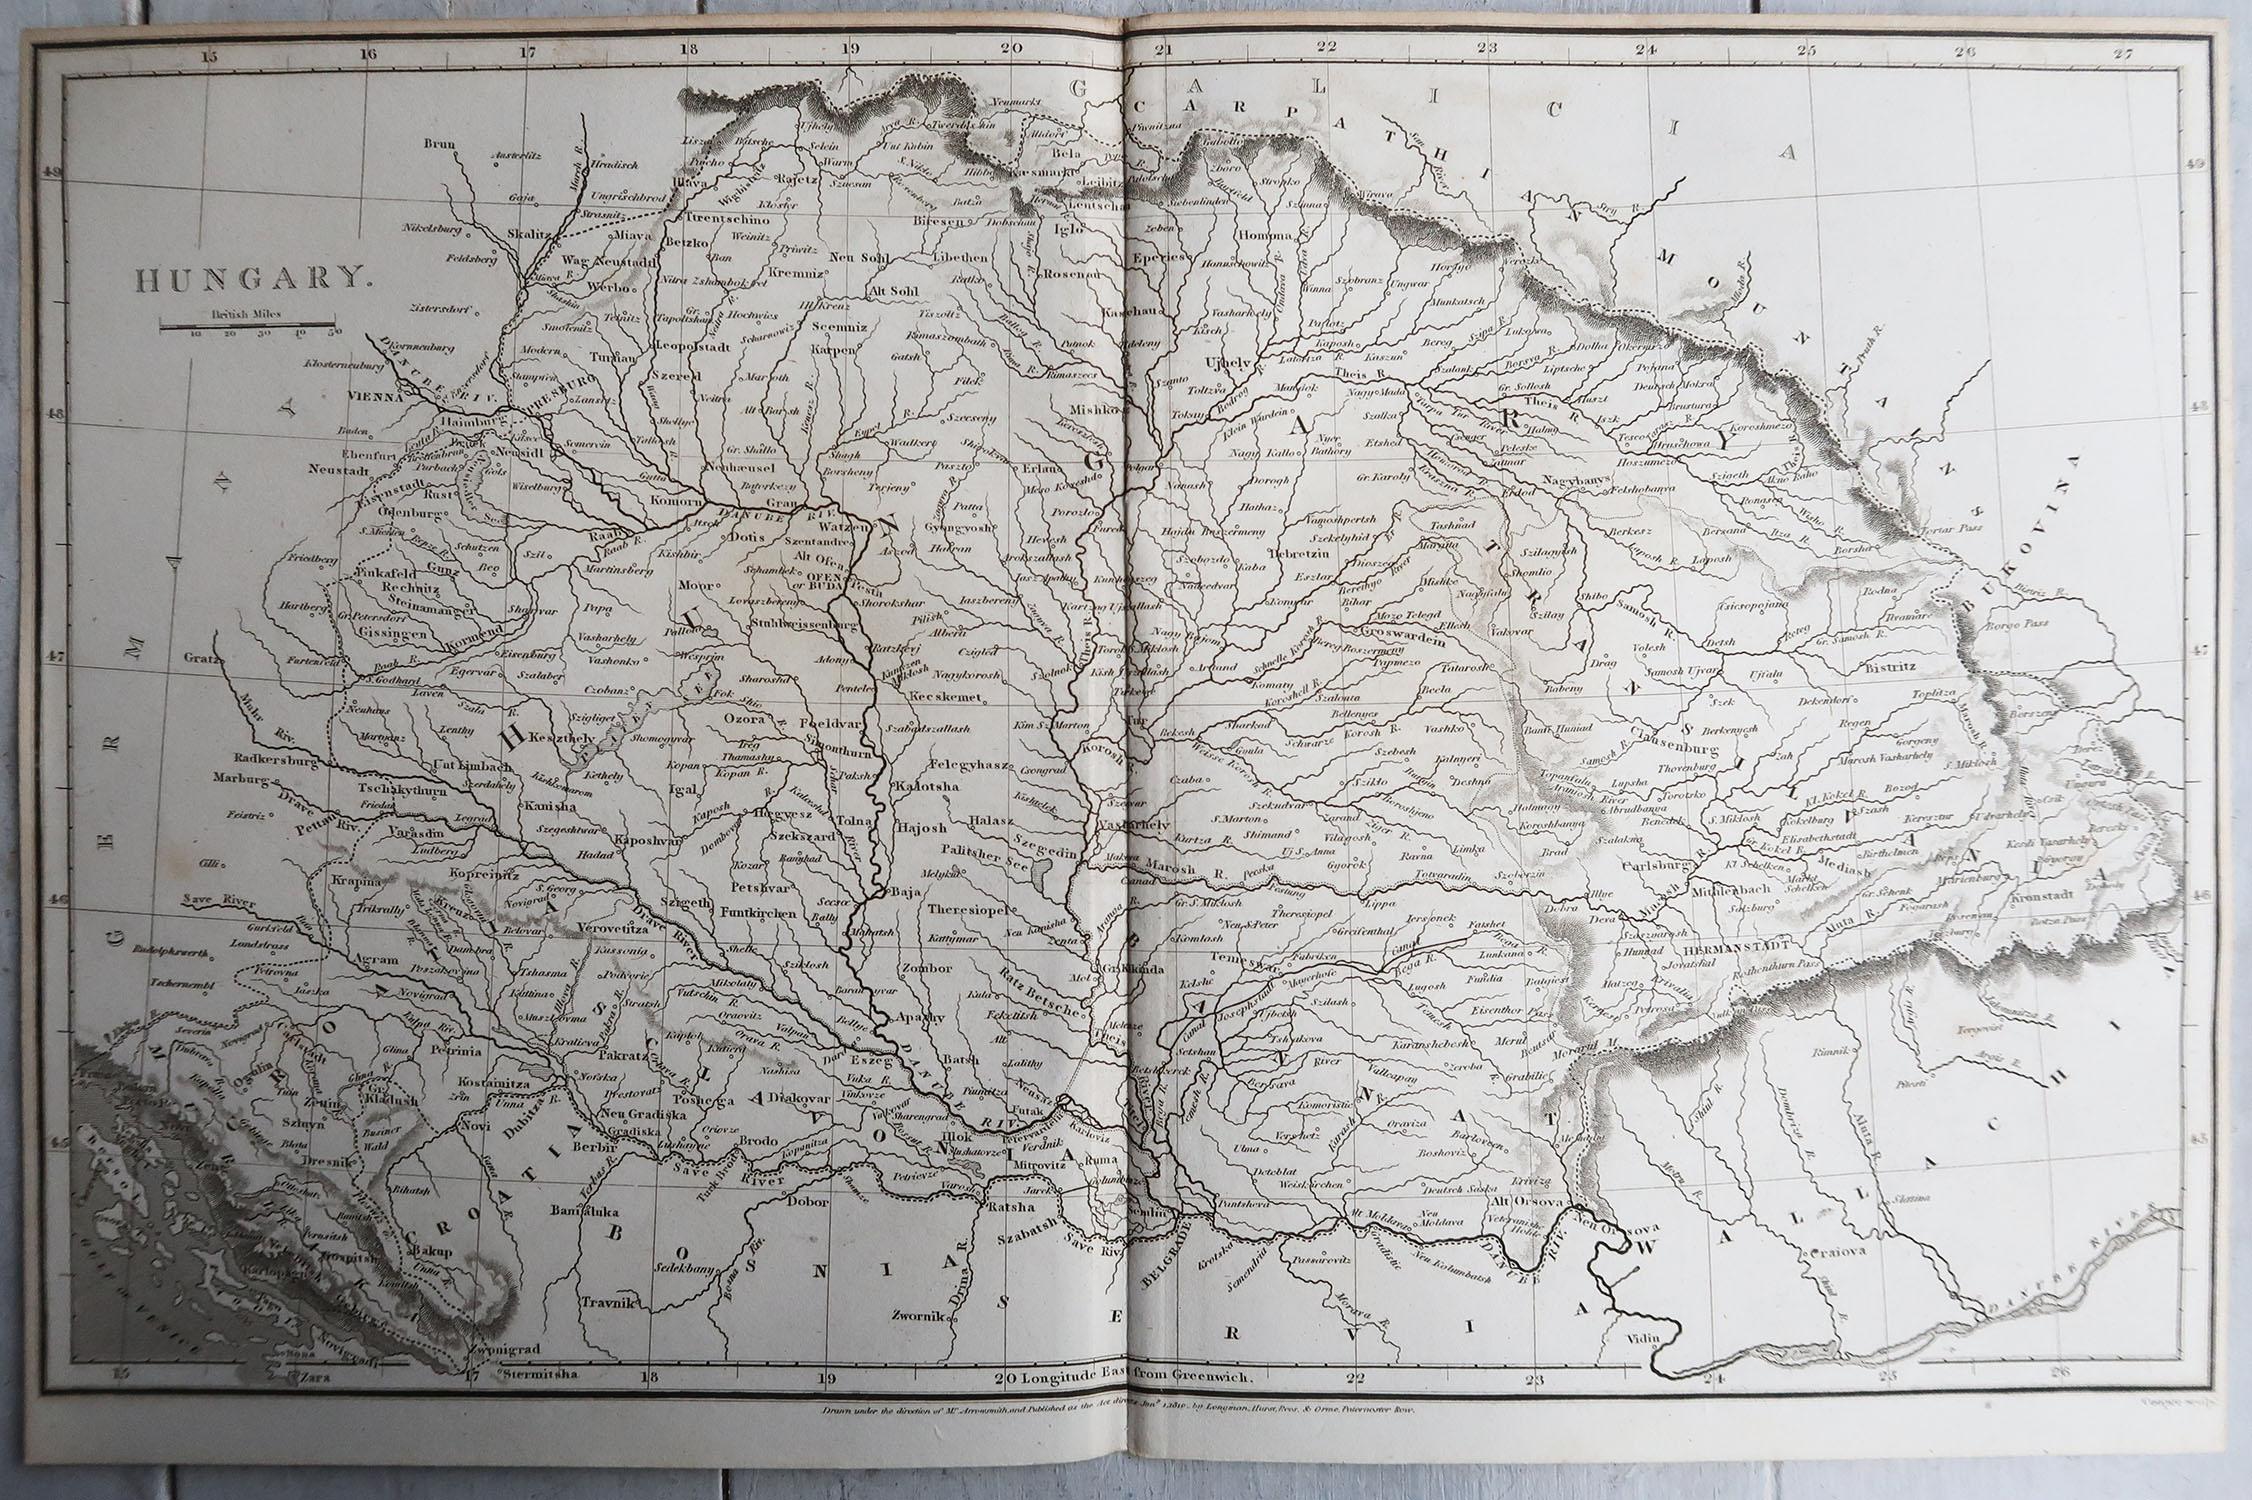 Other Original Antique Map of Hungary, Arrowsmith, 1820 For Sale